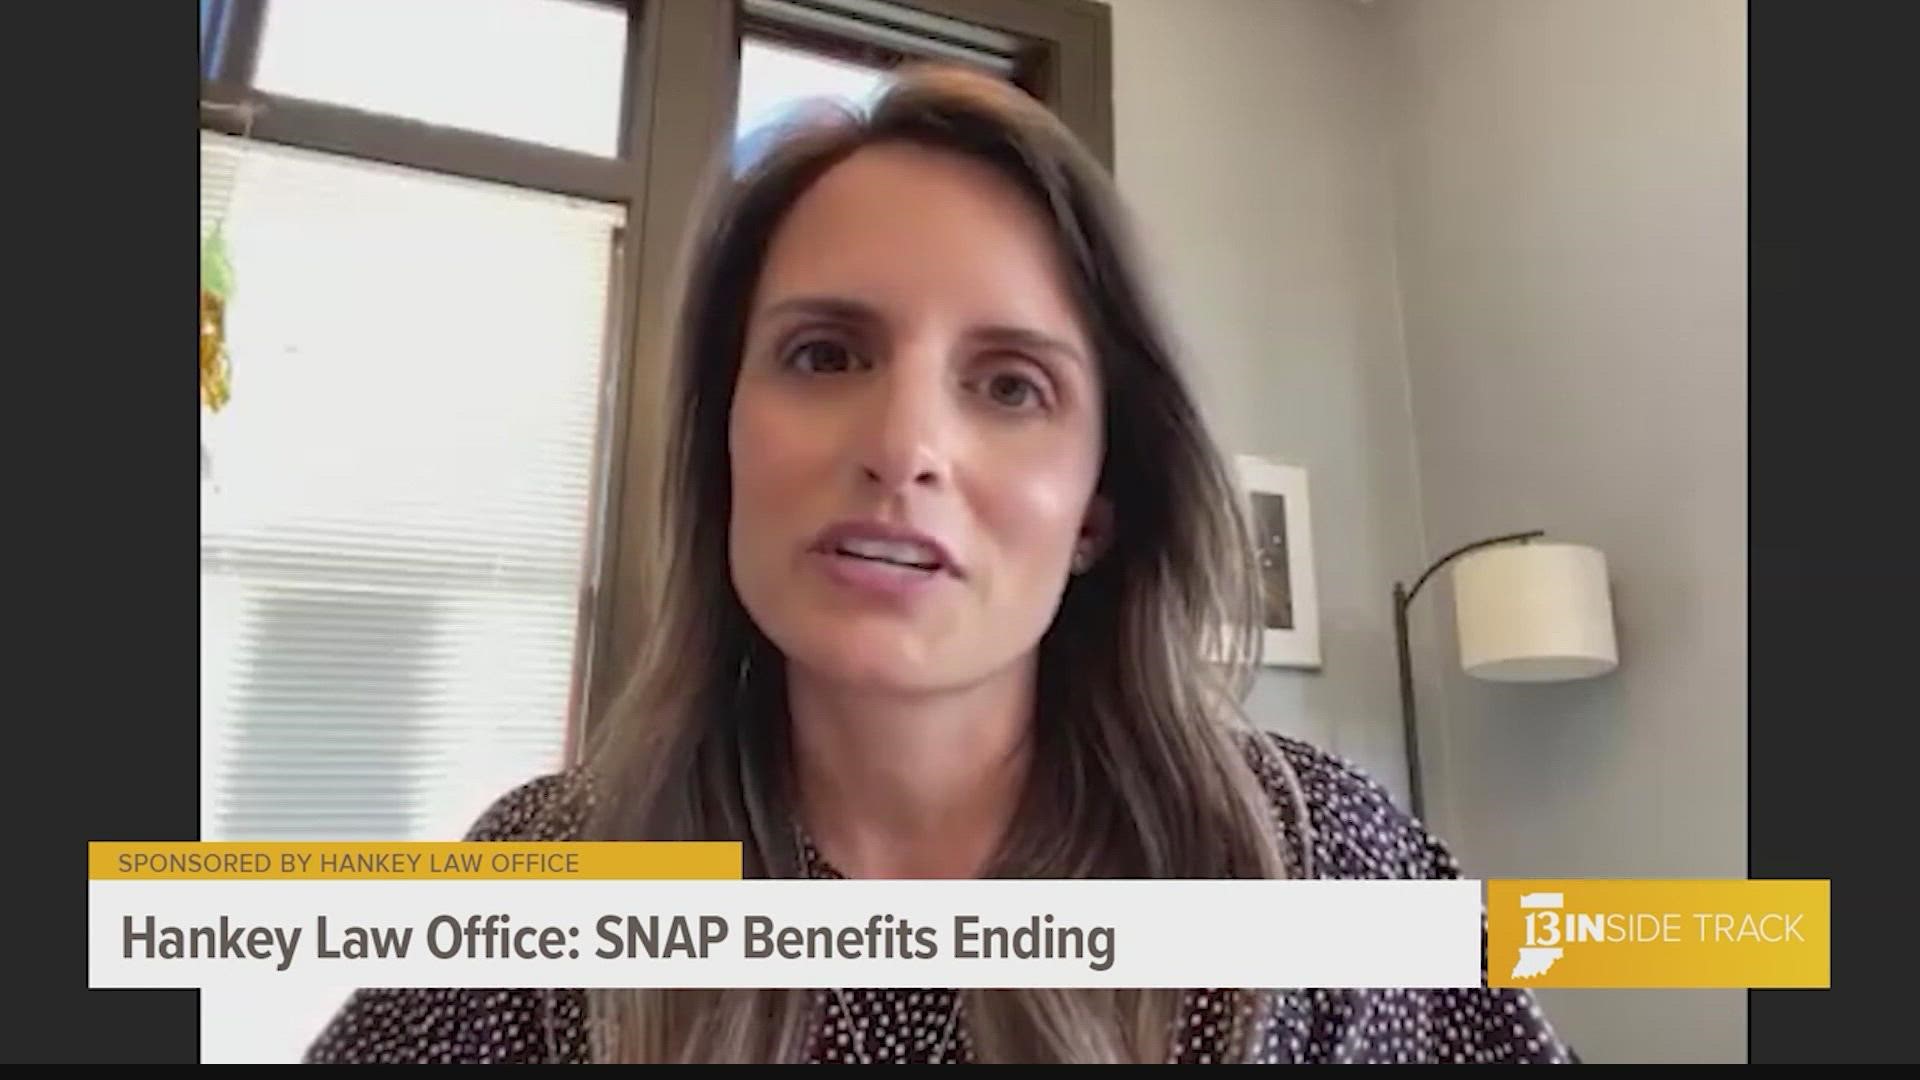 SNAP benefits, a supplement nutritional assistance program, ended on June 1, 2022. Learn how to receive support from other benefit programs.